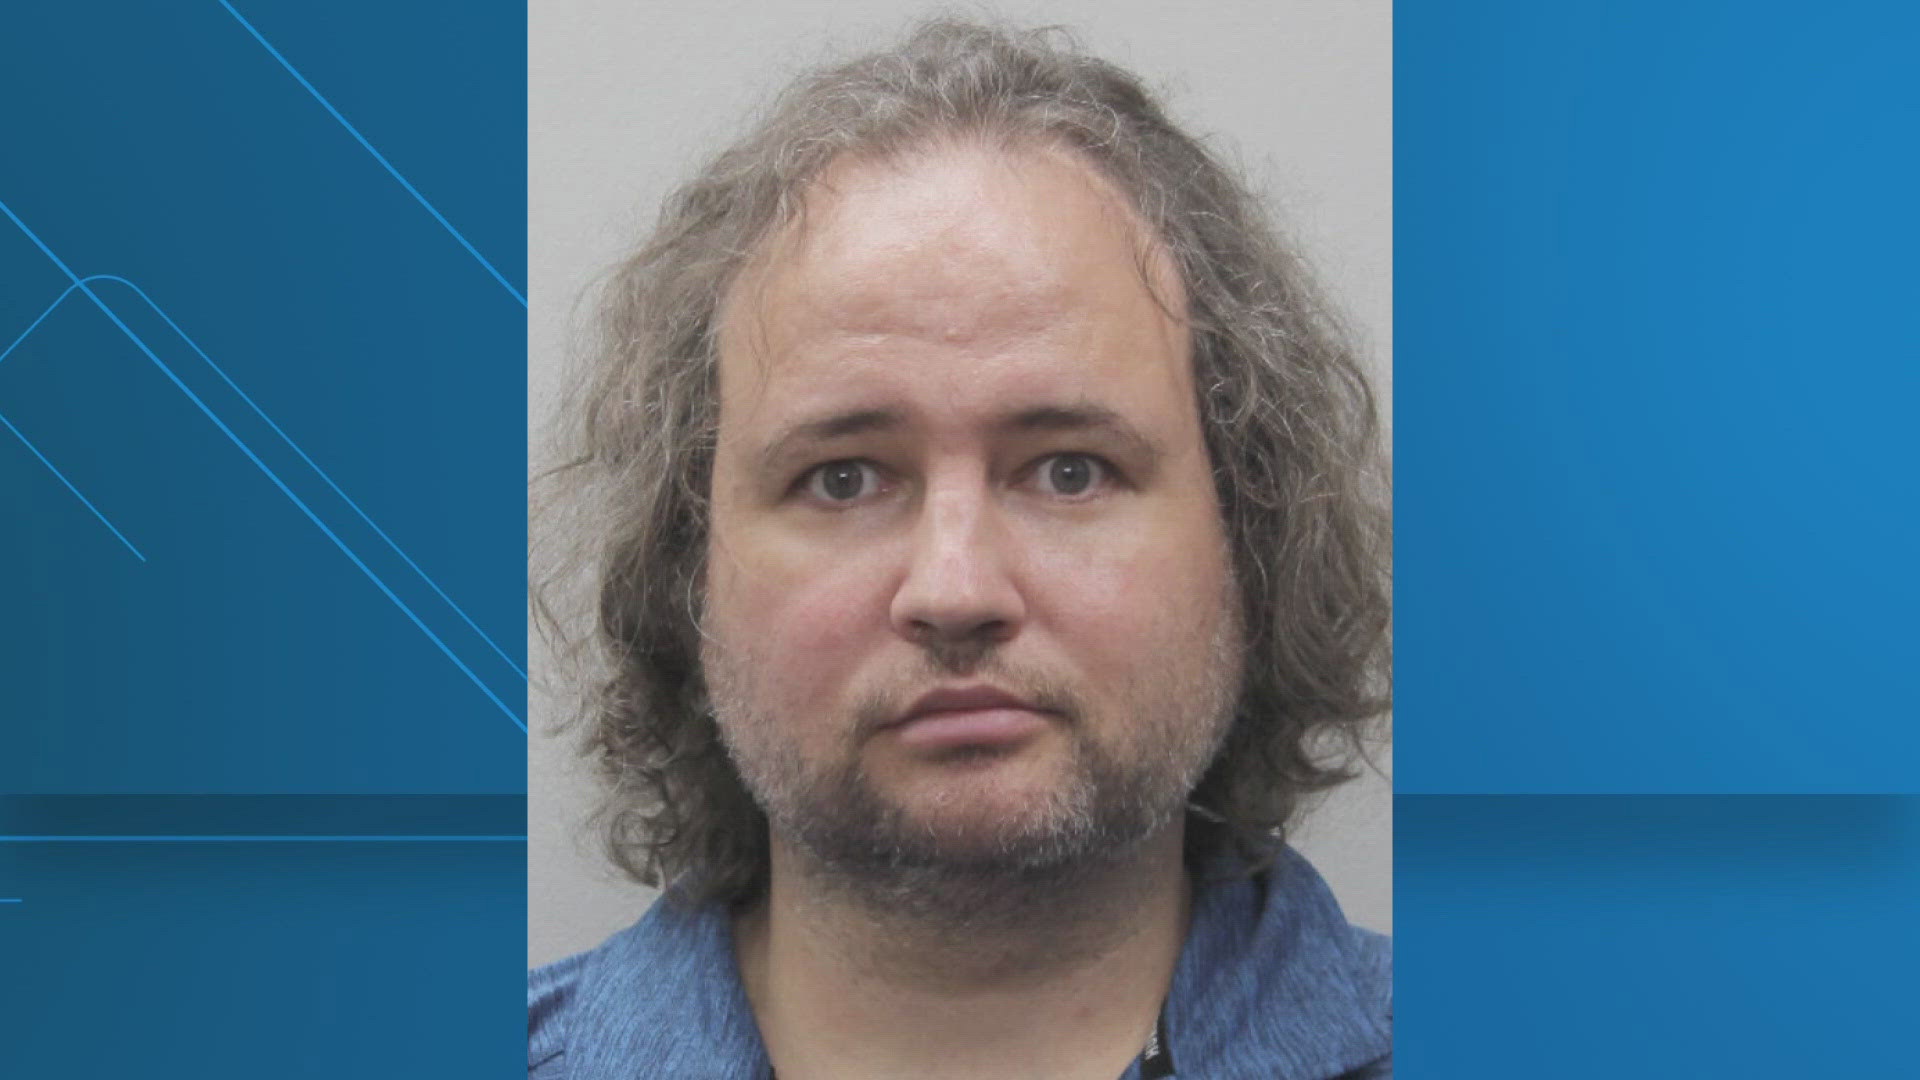 A man accused of having inappropriate communication with a child online and attempting to lure them to a location for sex may have more victims out there, police say